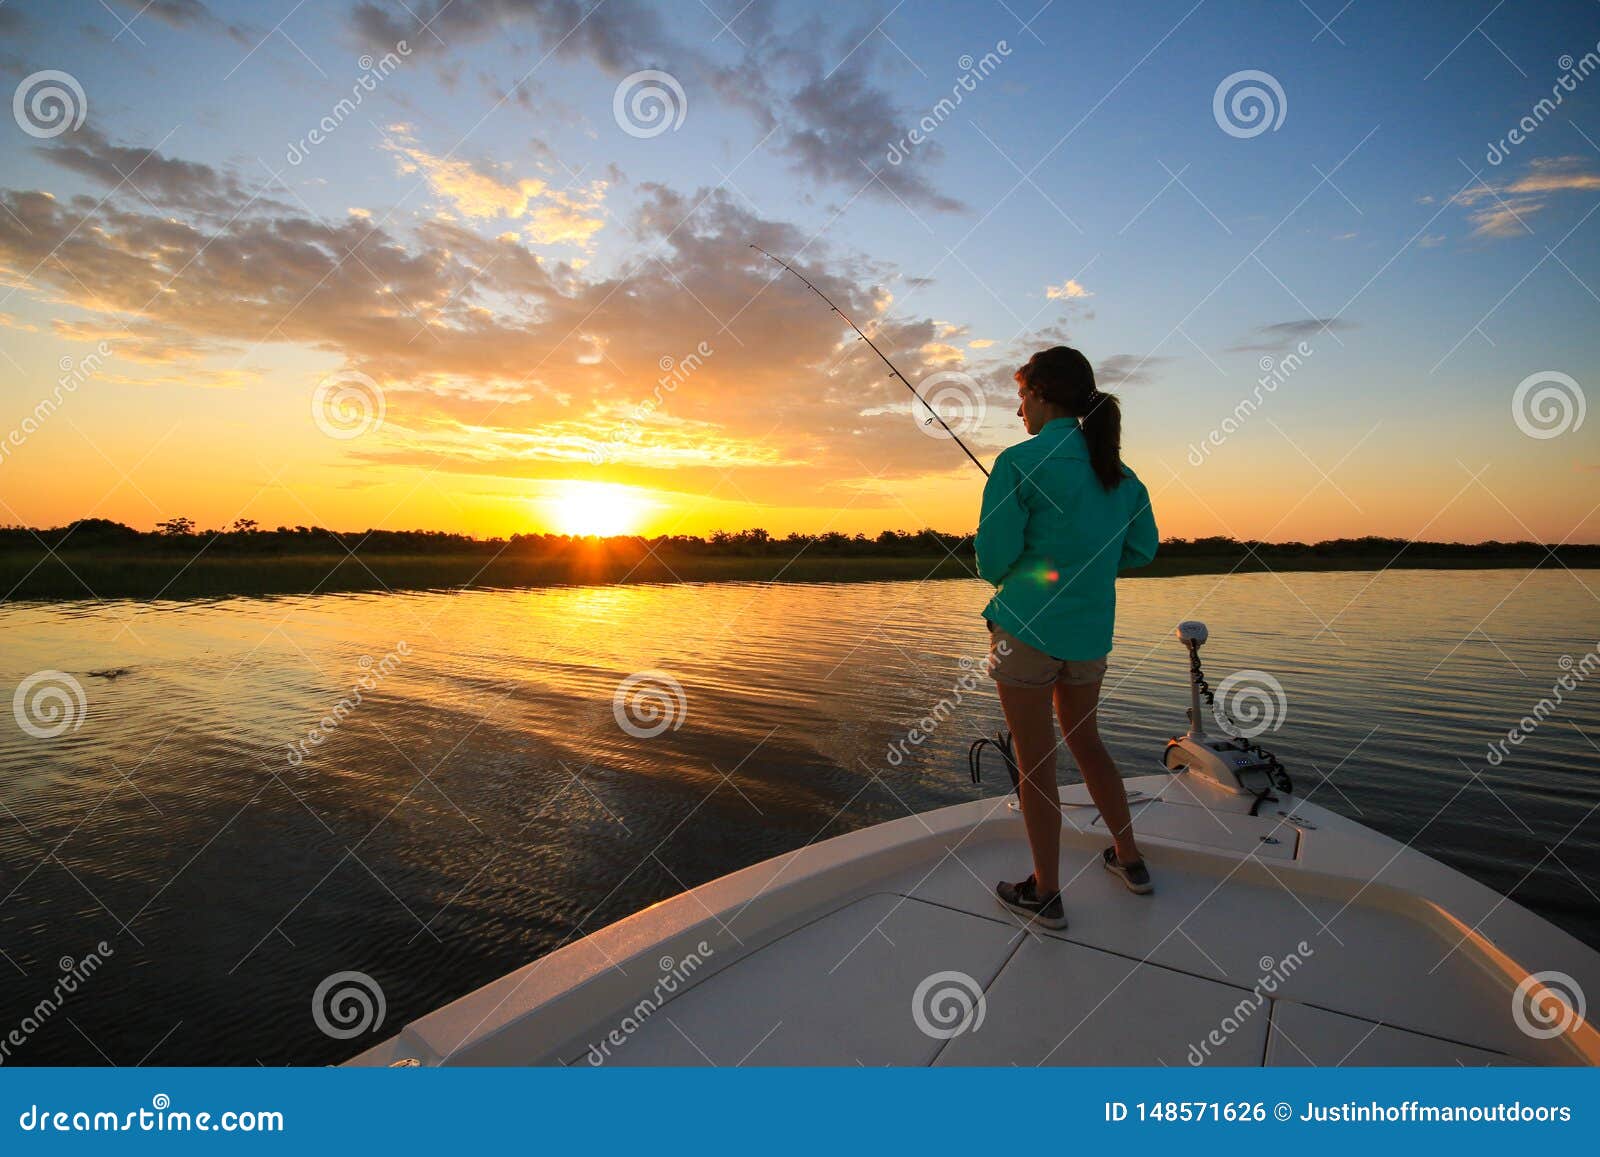 woman saltwater fishing casting from boat during sunrise